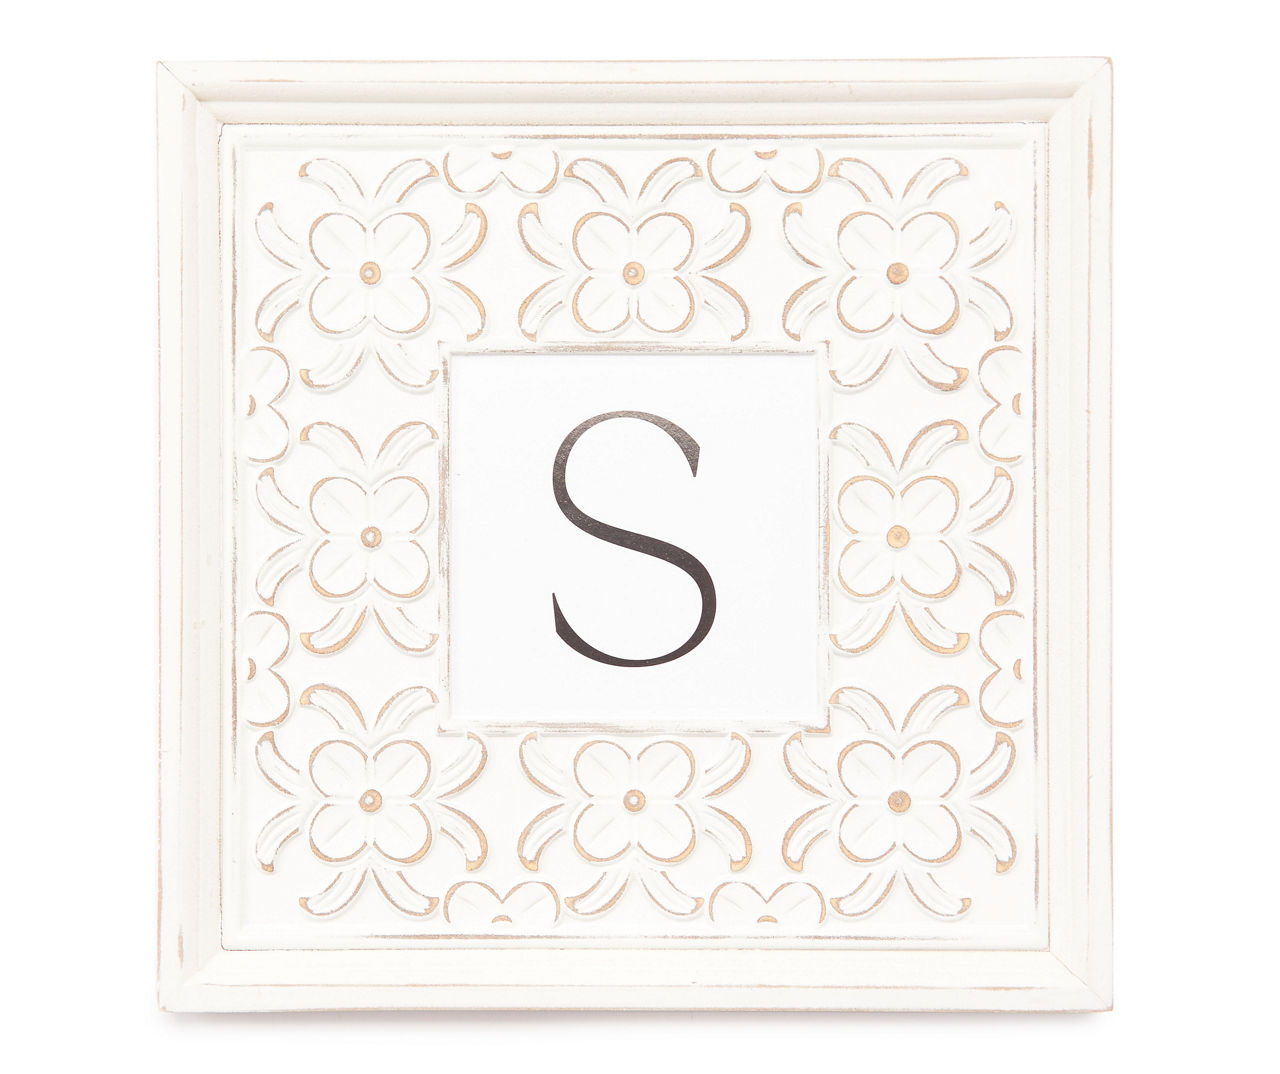 "S" White Distressed Carved Floral Monogram Square Wall Plaque